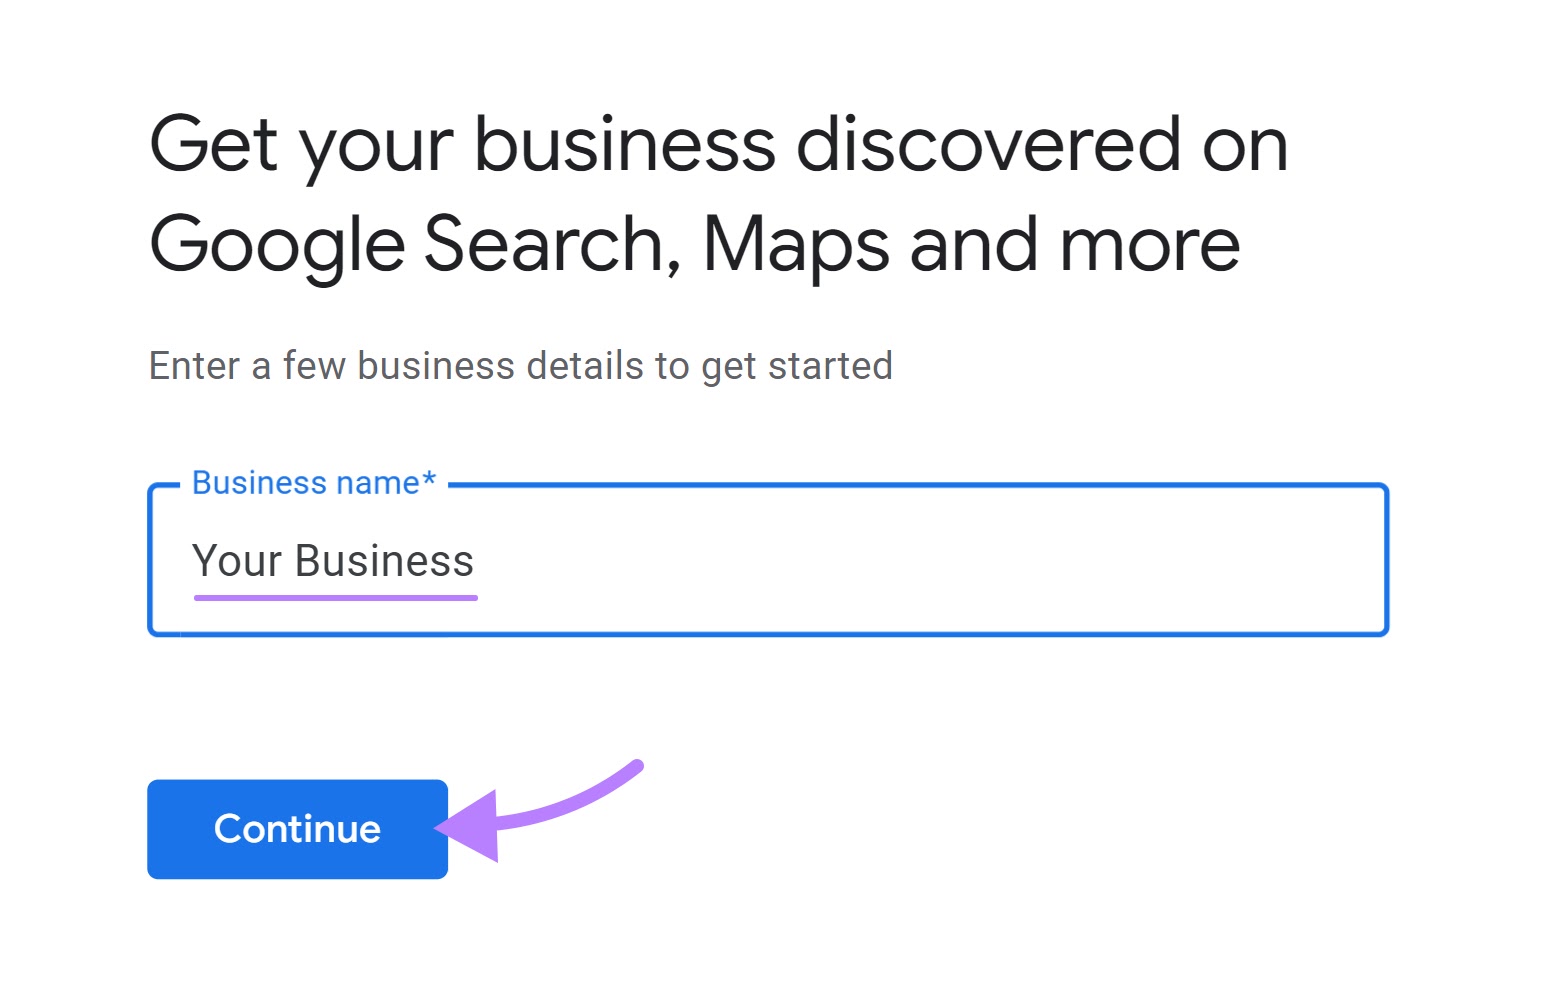 "Continue" fastener  nether  the "Business name" tract  successful  Google Business Profile page